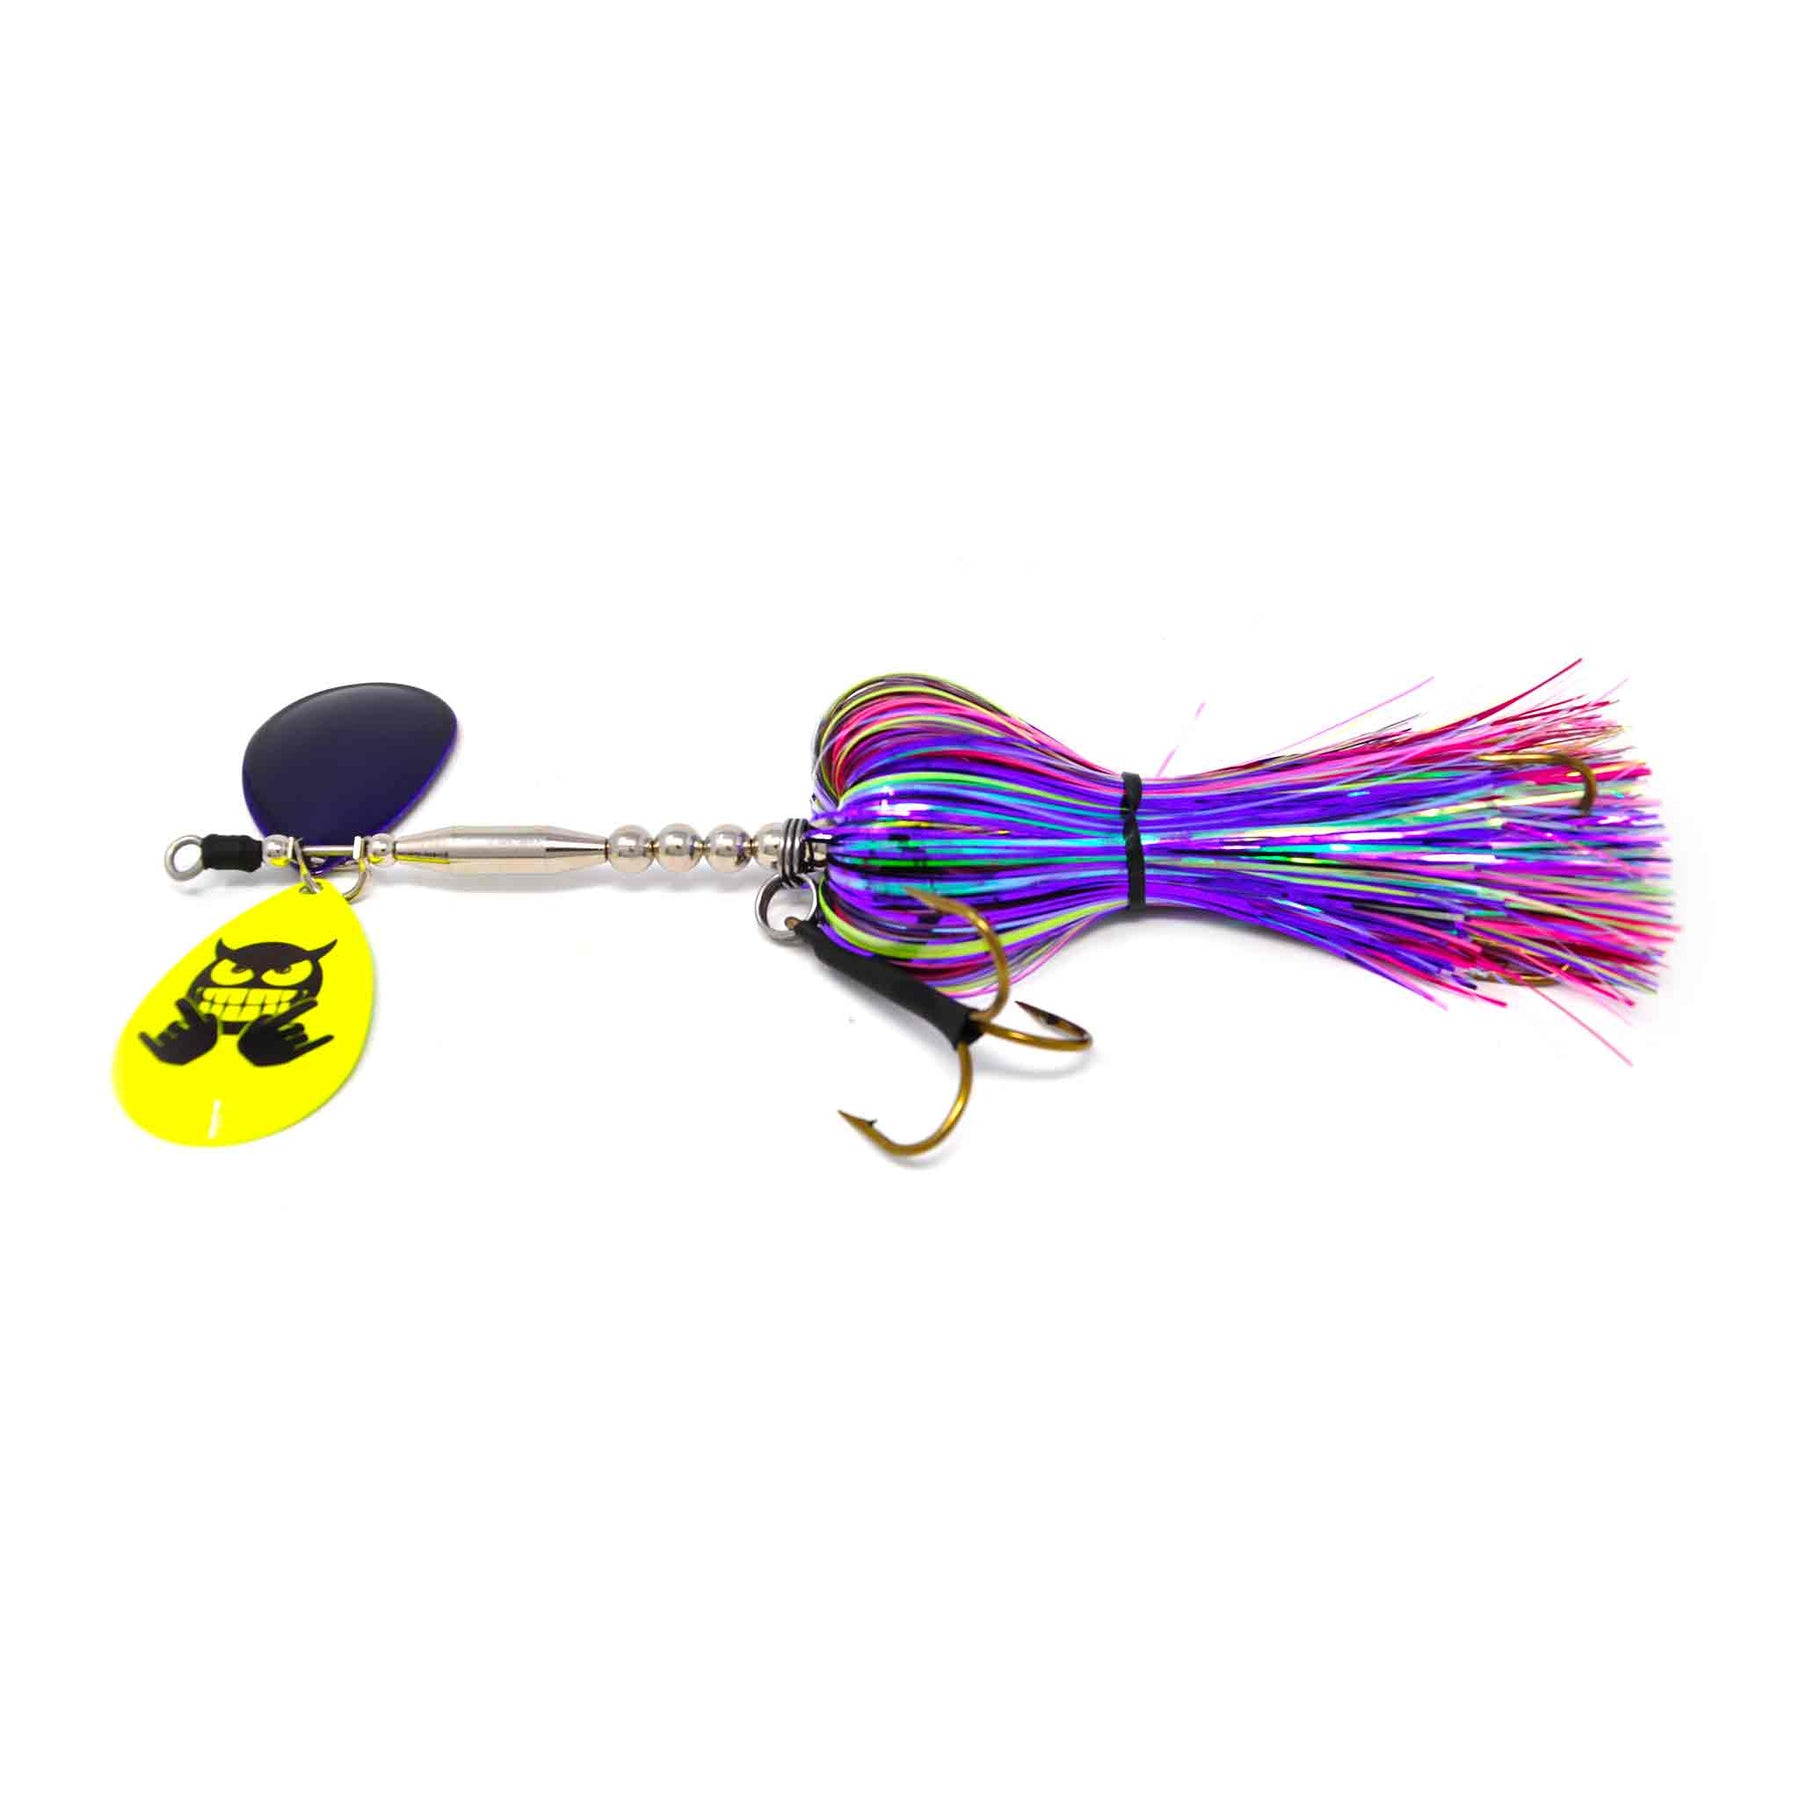 View of Bucktails Mad Chasse Mini Double Colorado 8/8 Bucktail Psycho Bubble Gum available at EZOKO Pike and Musky Shop